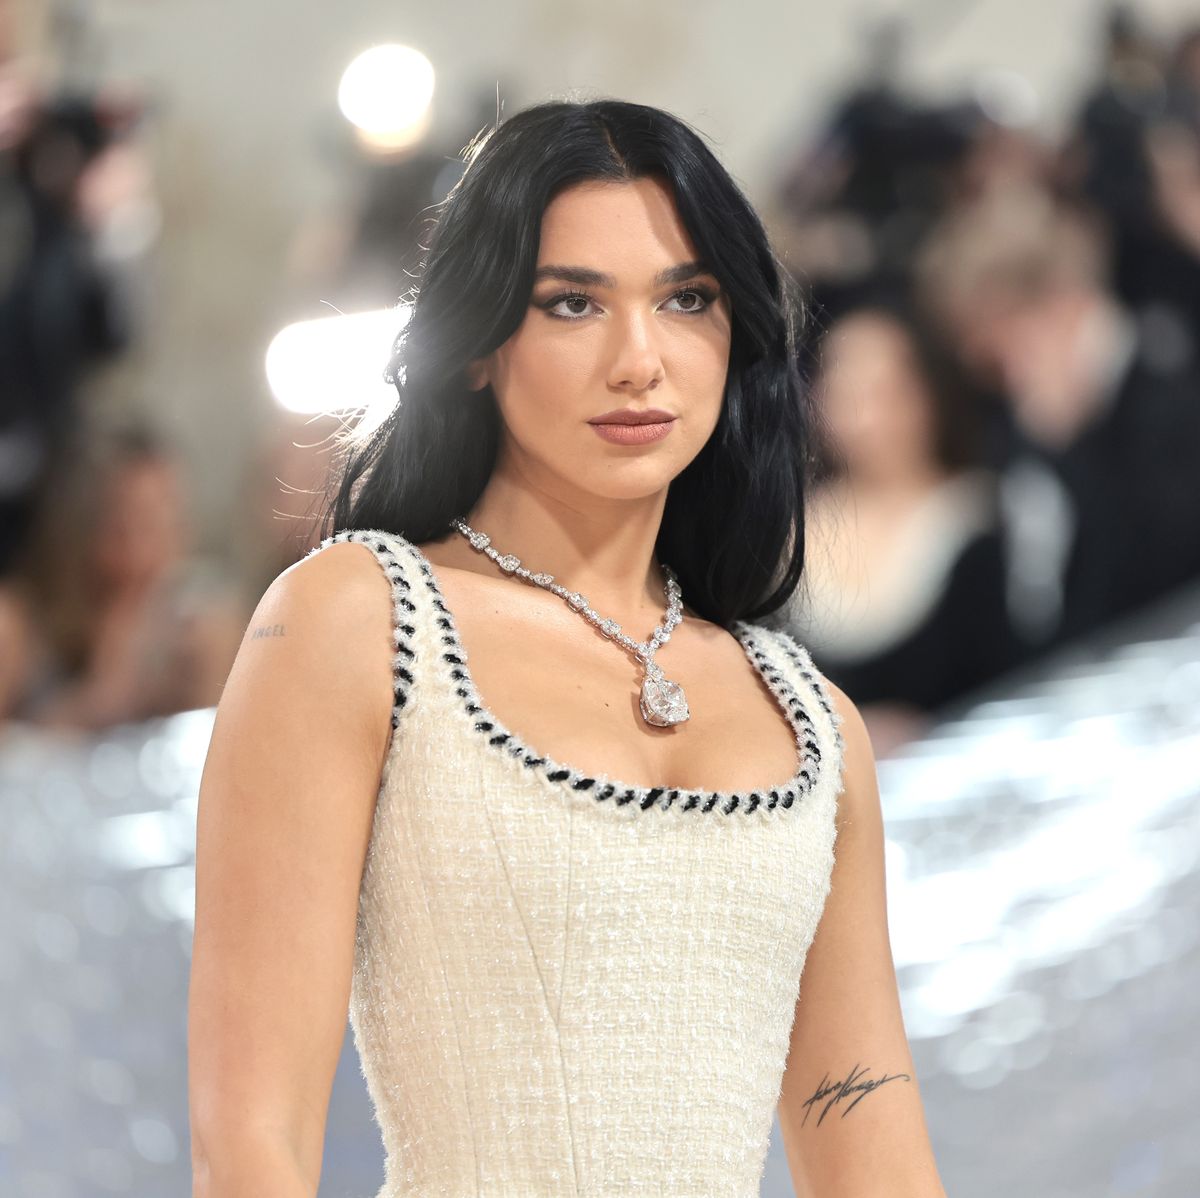 Dua Lipa attends the 2023 Met Gala with a huge diamond necklace and classy white dress